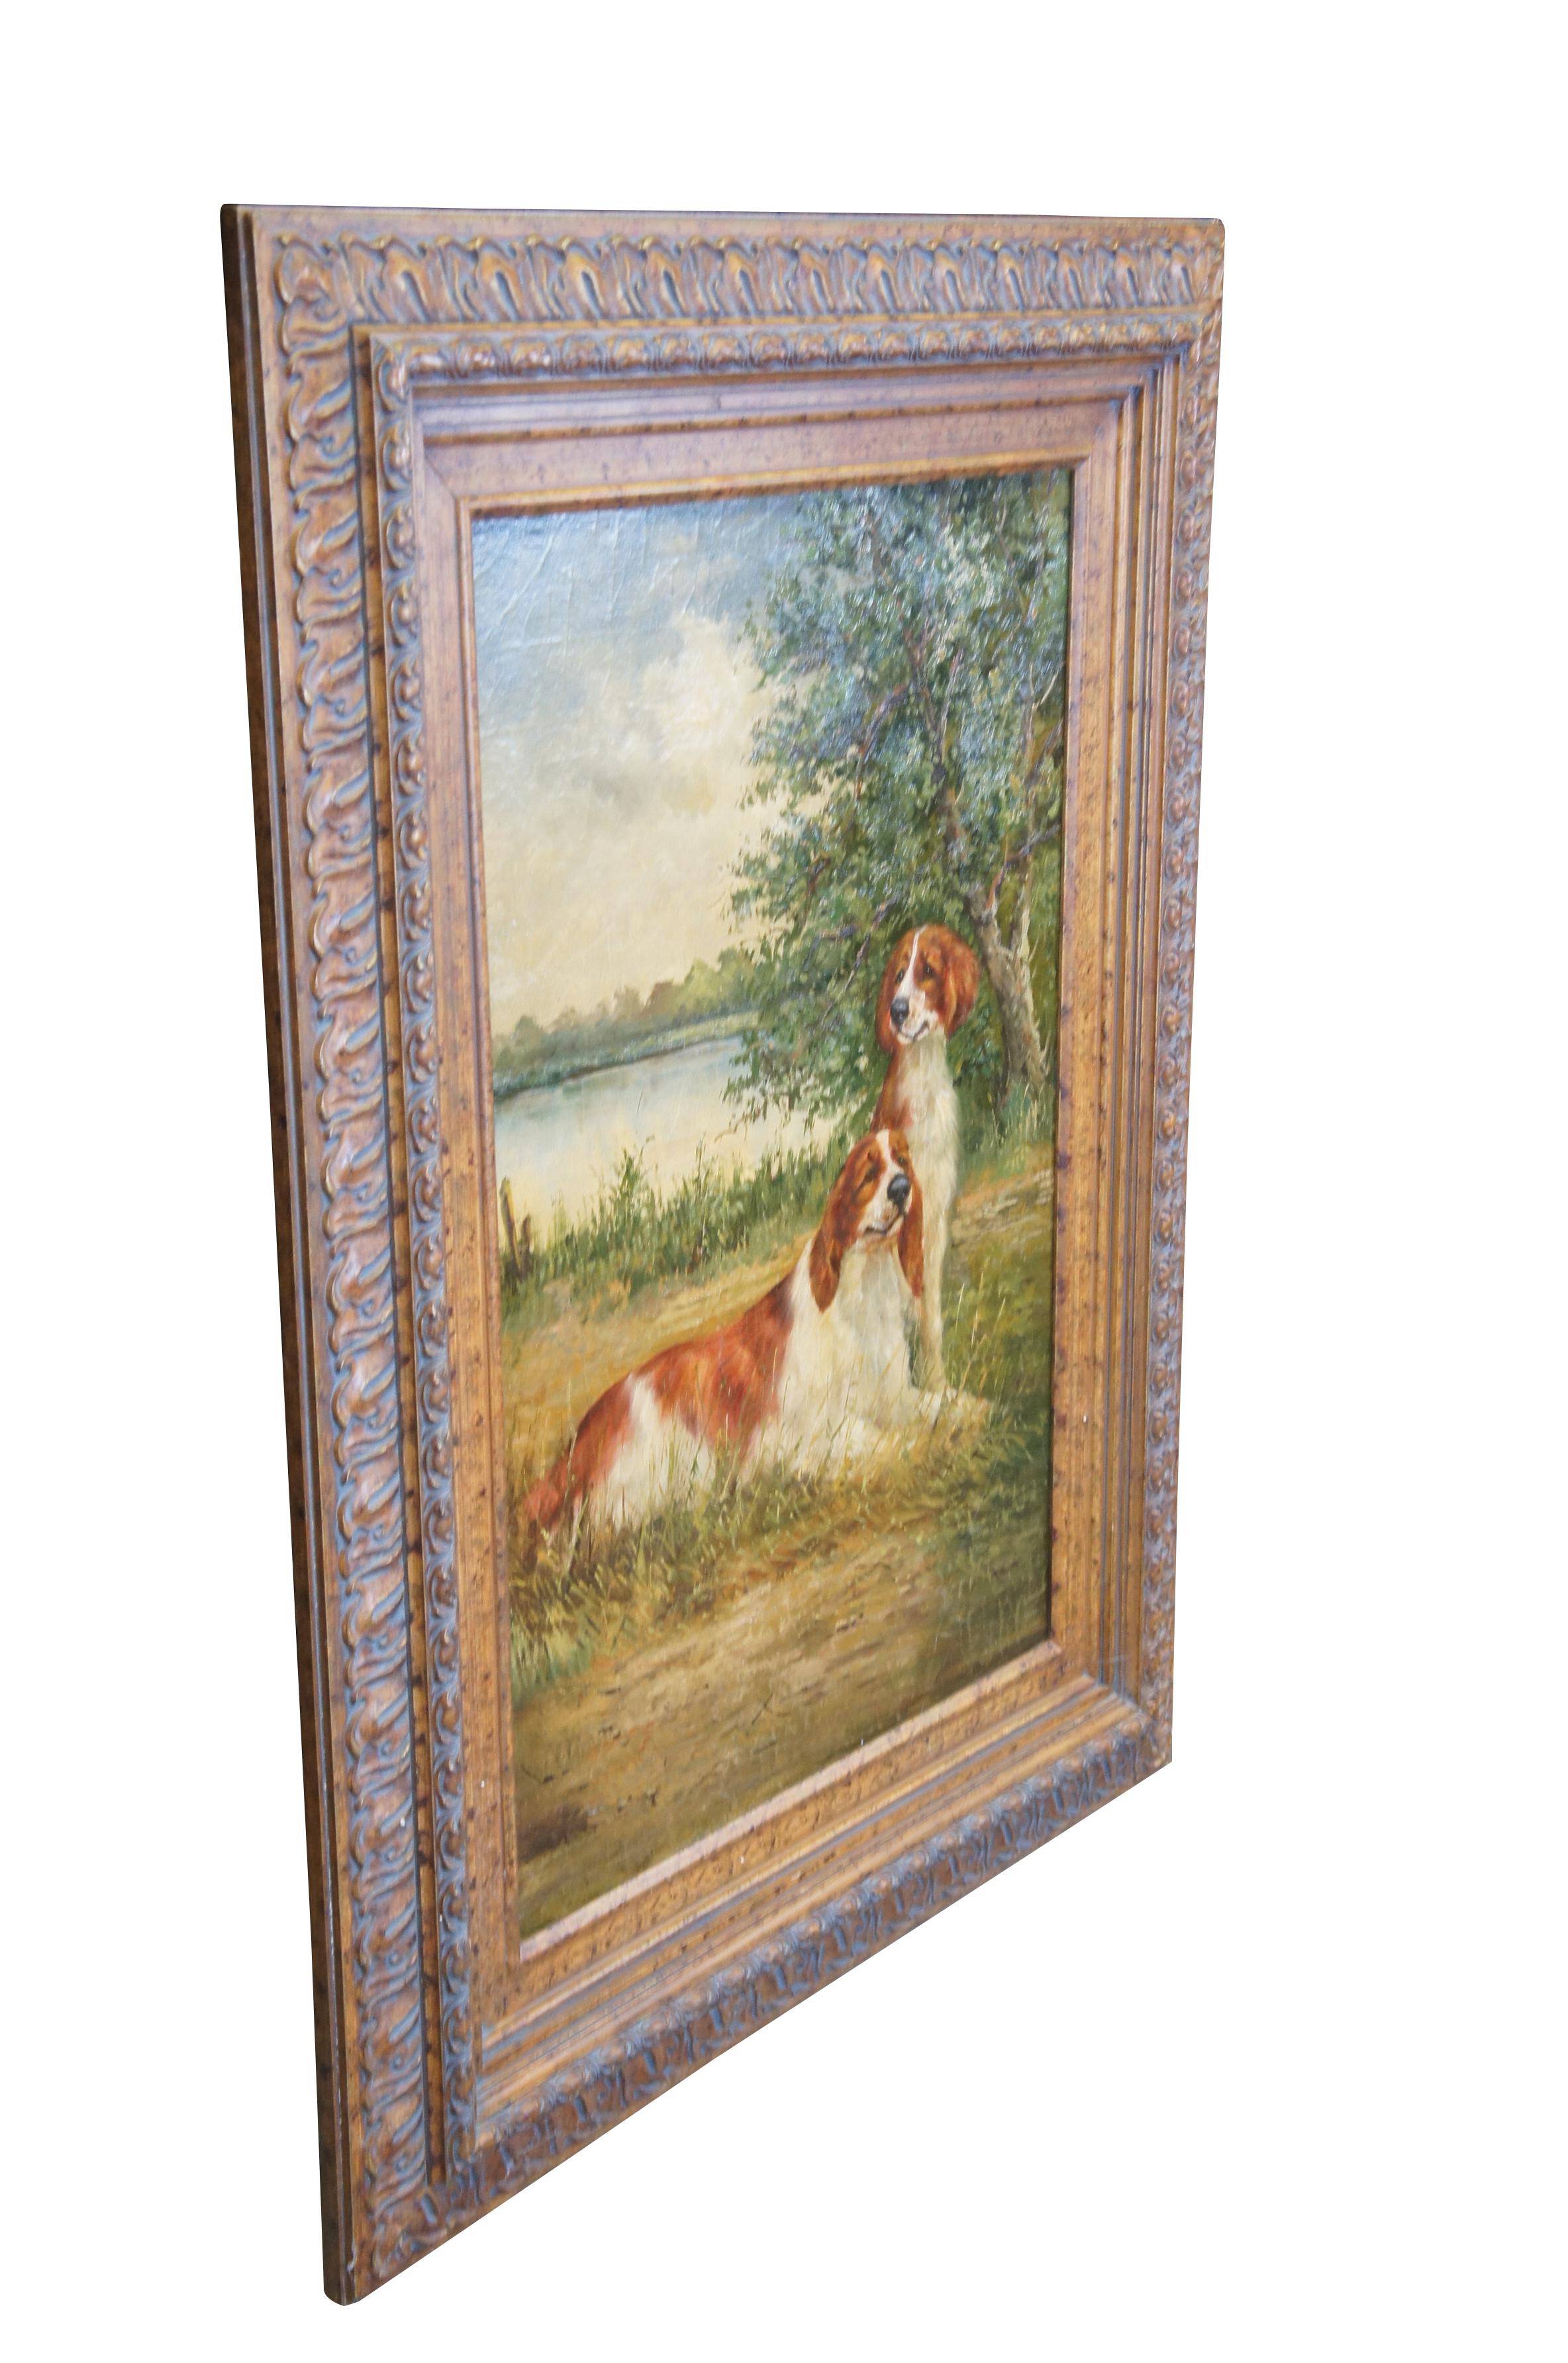 Large vintage landscape / dog oil painting on board depicting two red / brown and white Springer Spaniels seated in front of a large tree next to a lake .  Framed in gold floral acanthus style frame.

Dimensions:
35.5